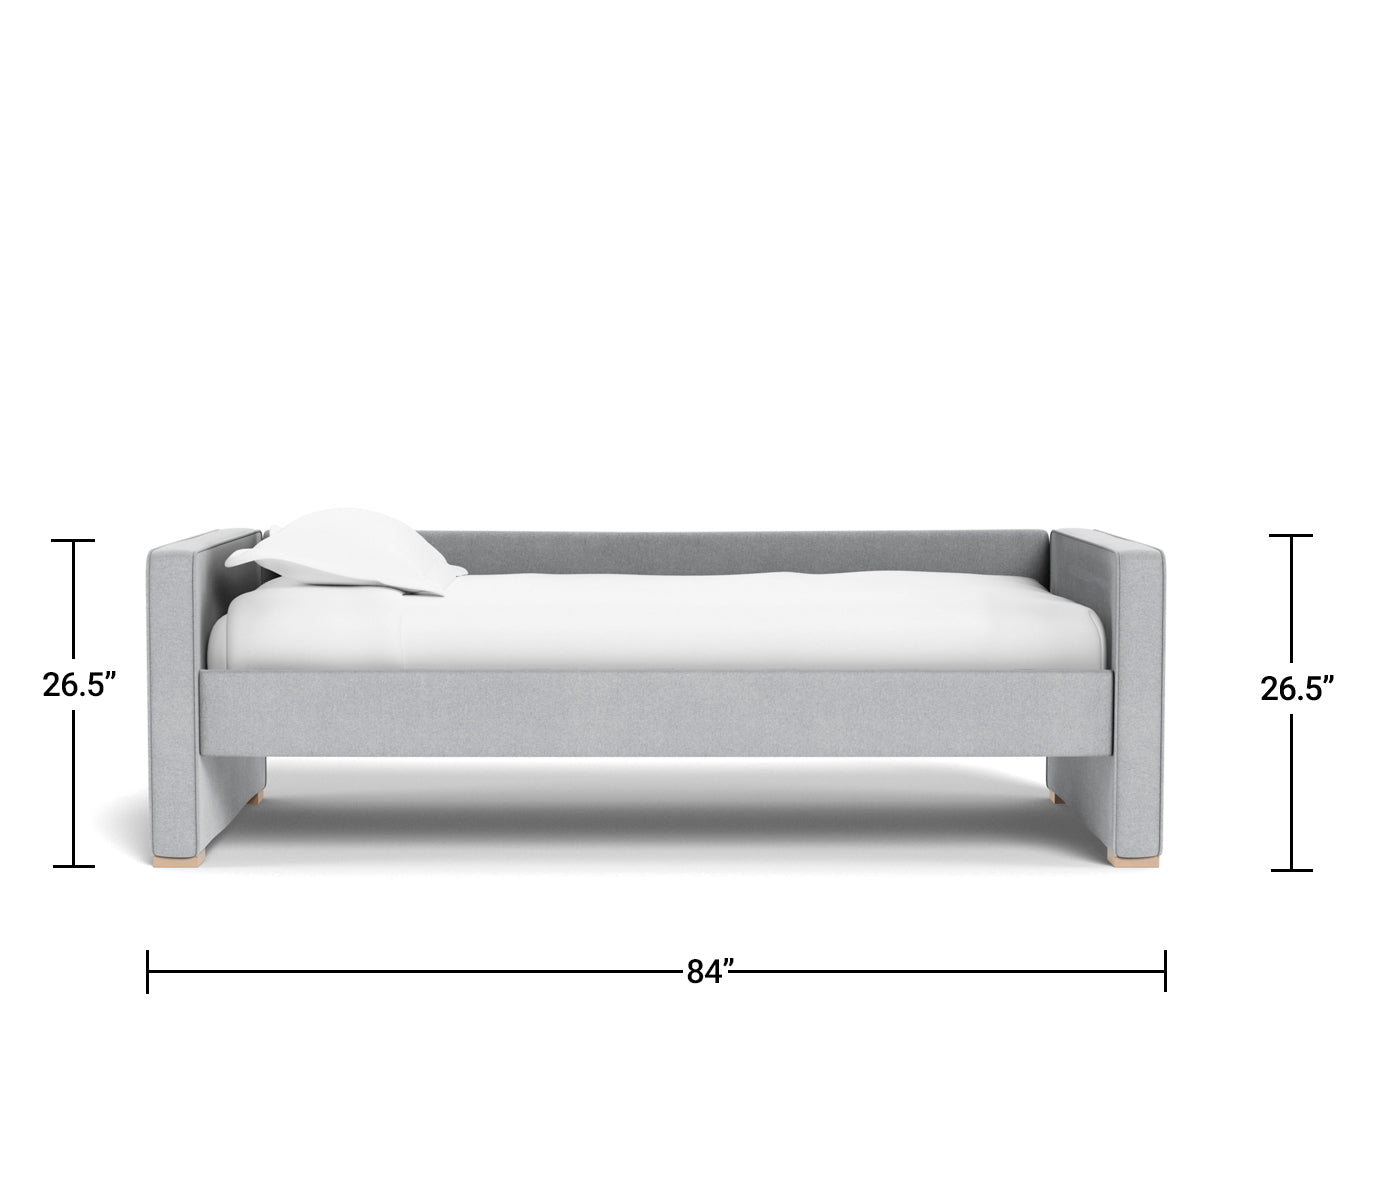 Twin Daybed Dimensions